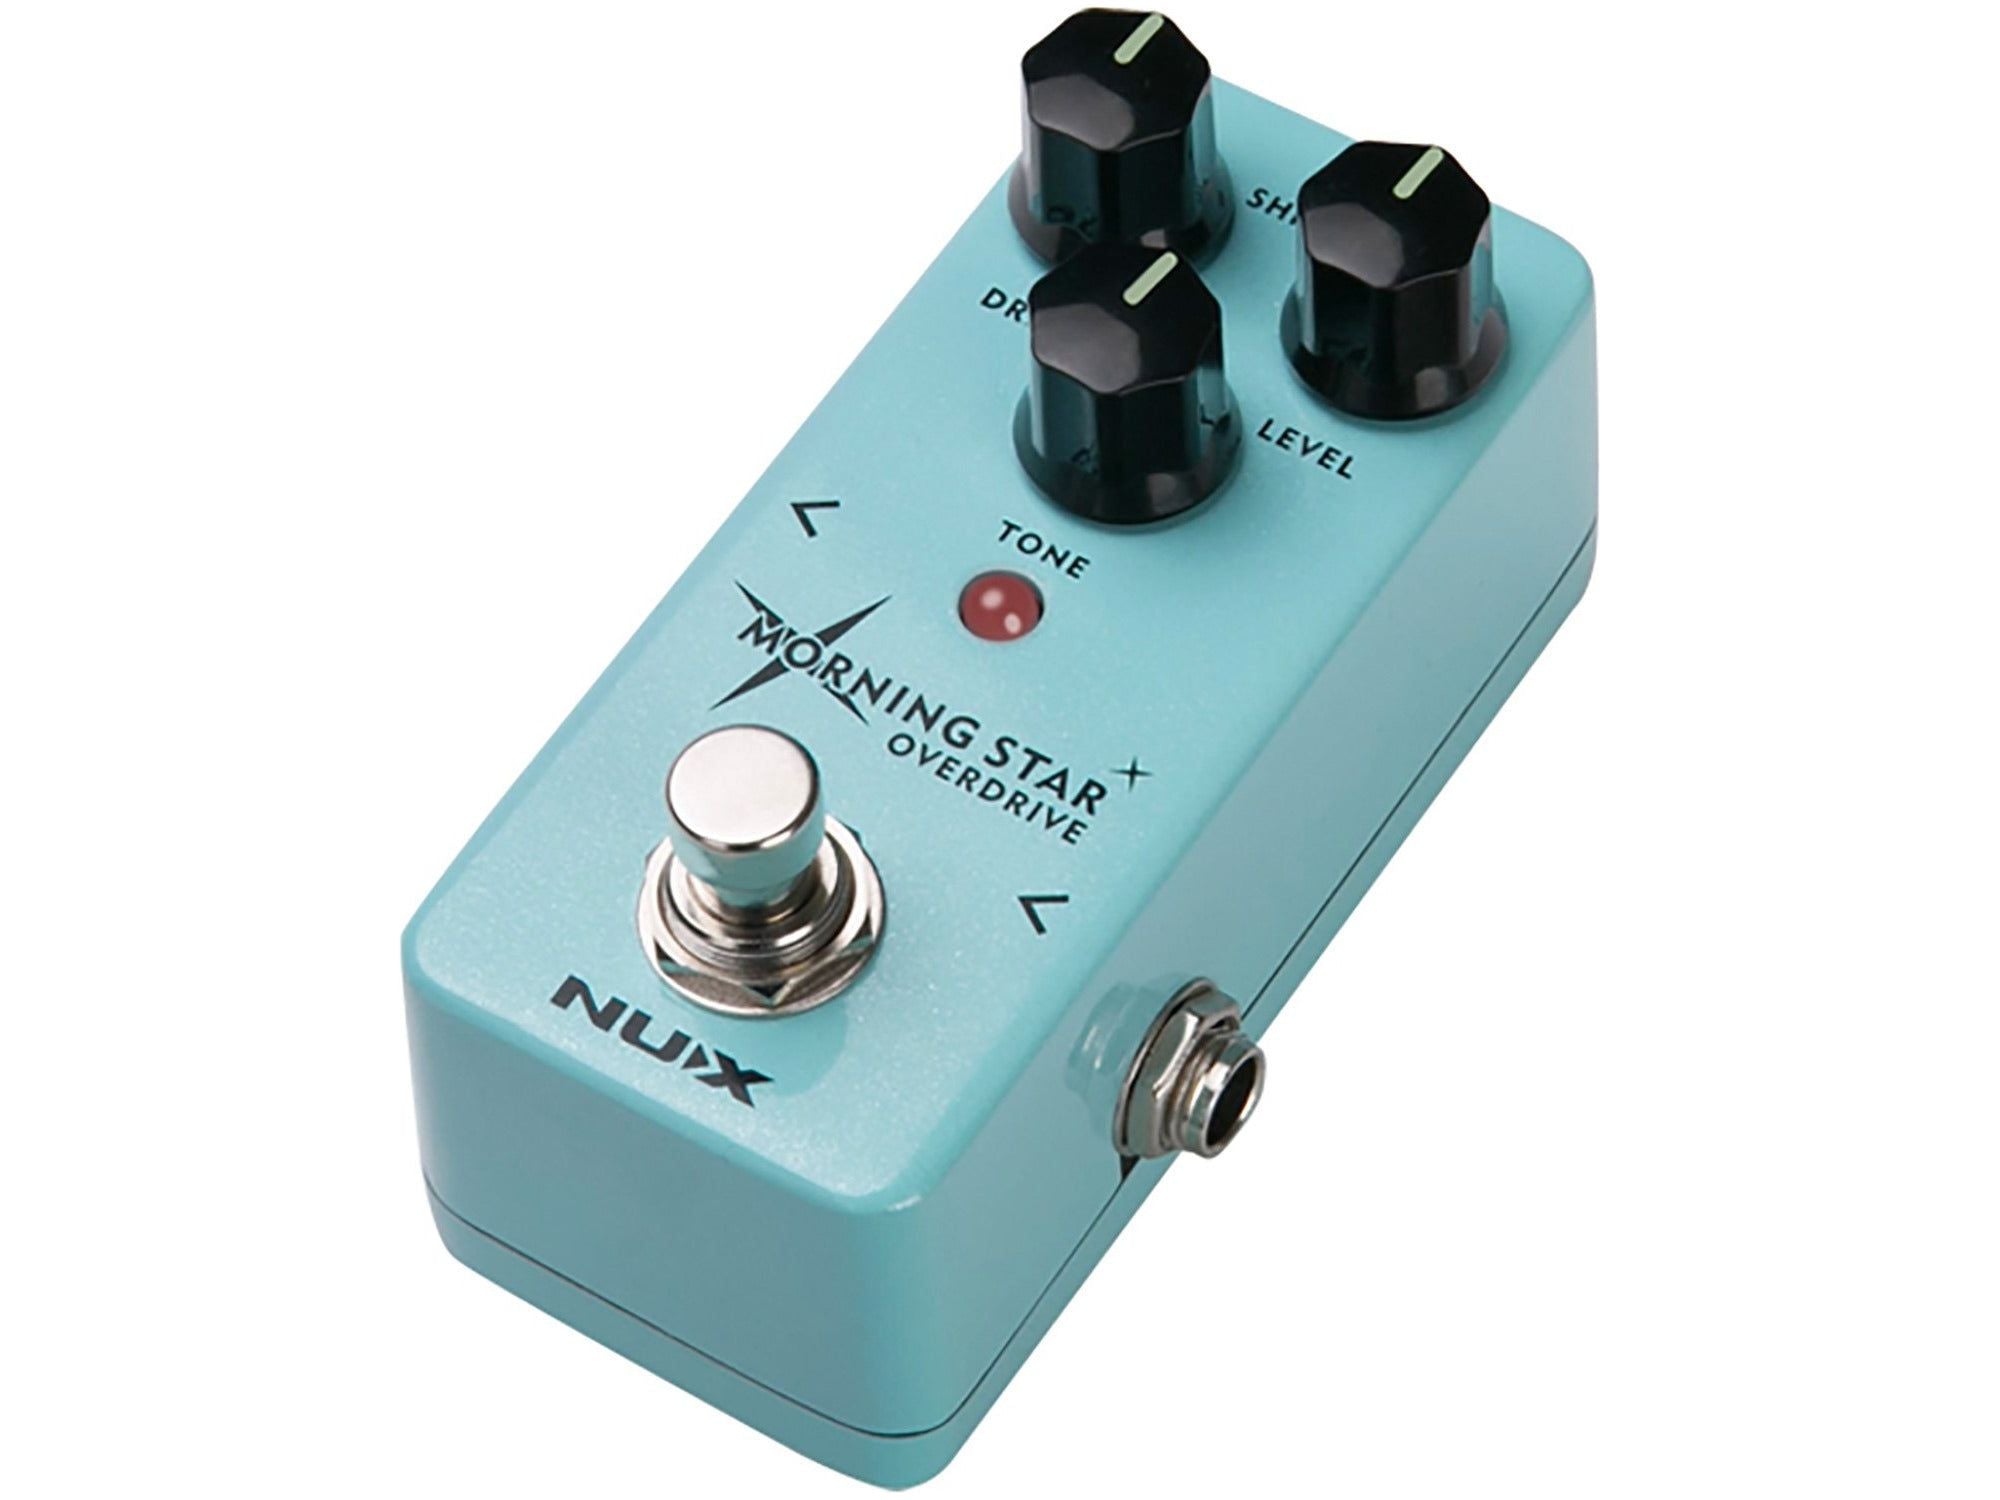 NuX Morning Star Overdrive Pedal